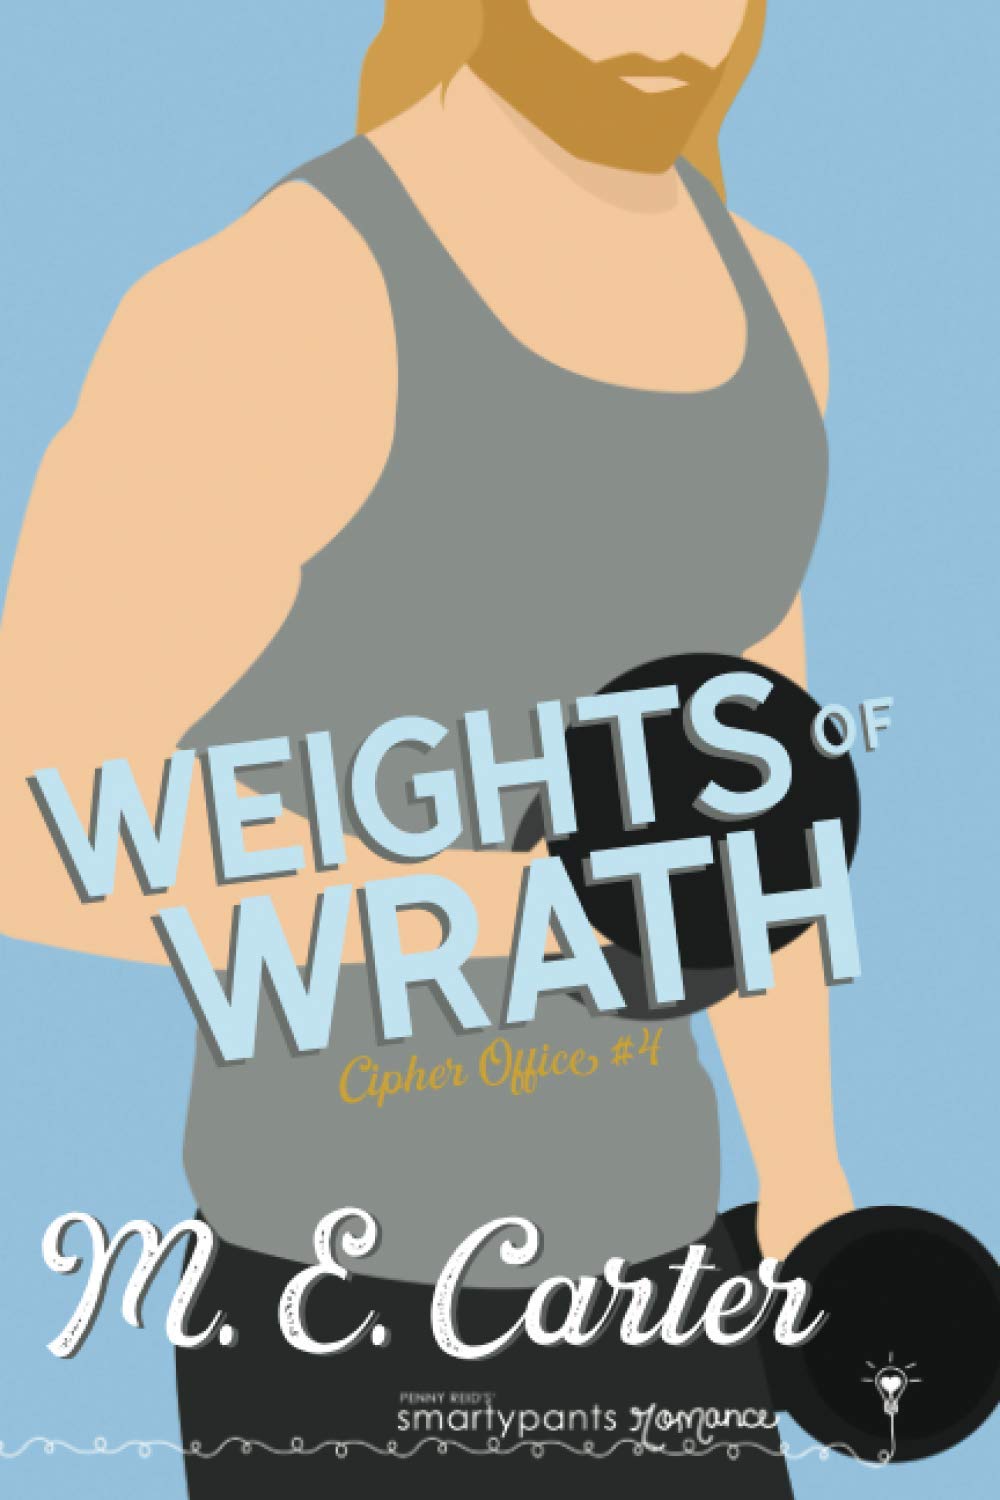 [EPUB] Cipher Office #4 Weights of Wrath